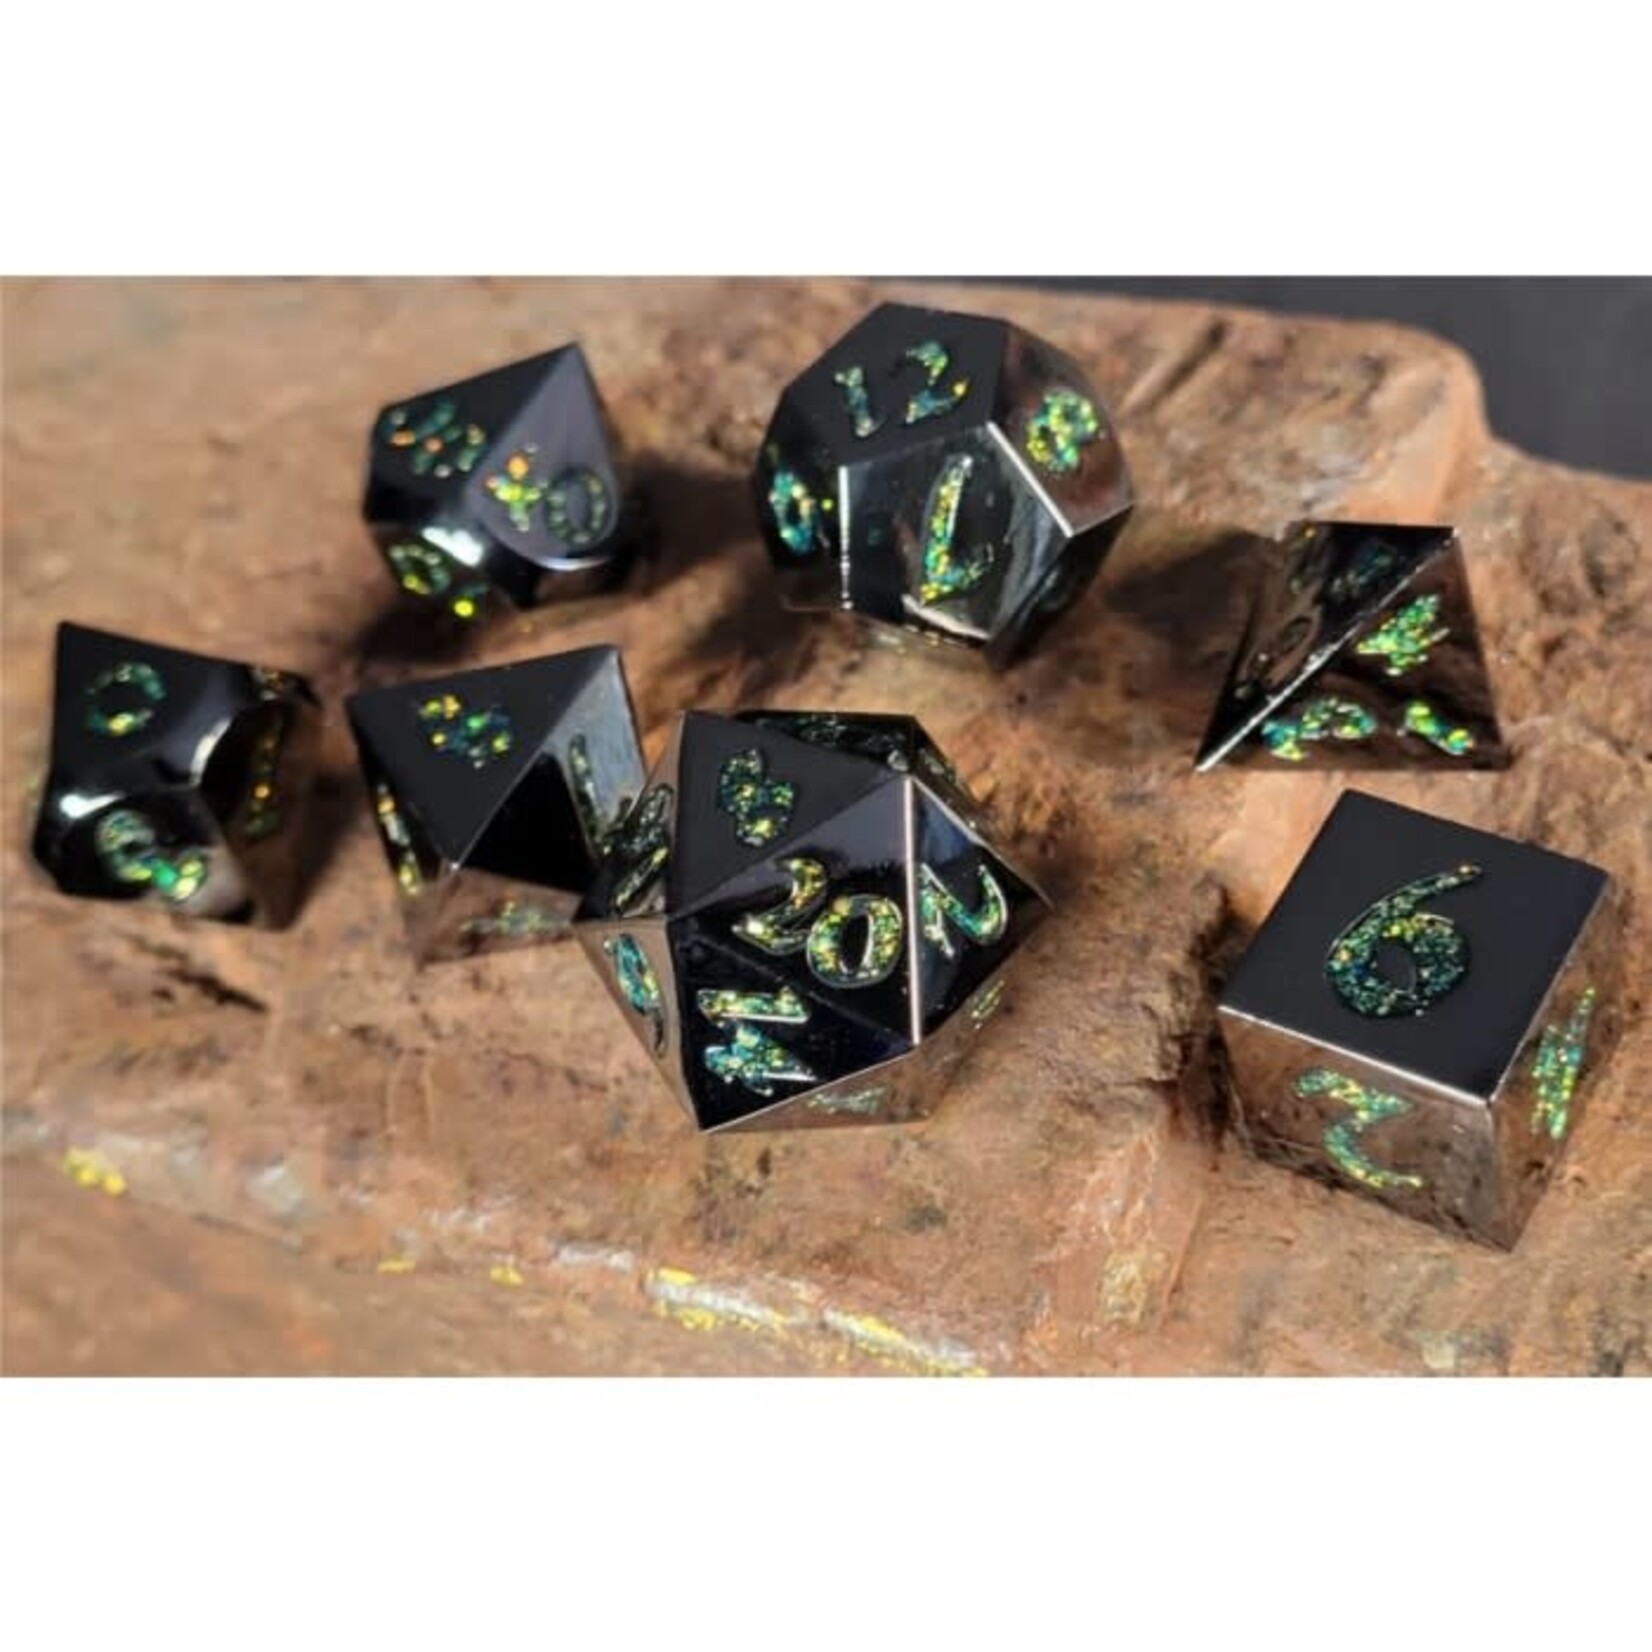 Forged Gaming Set of 7 Metal Dice: Forged Lore Gunmetal with Green Mica